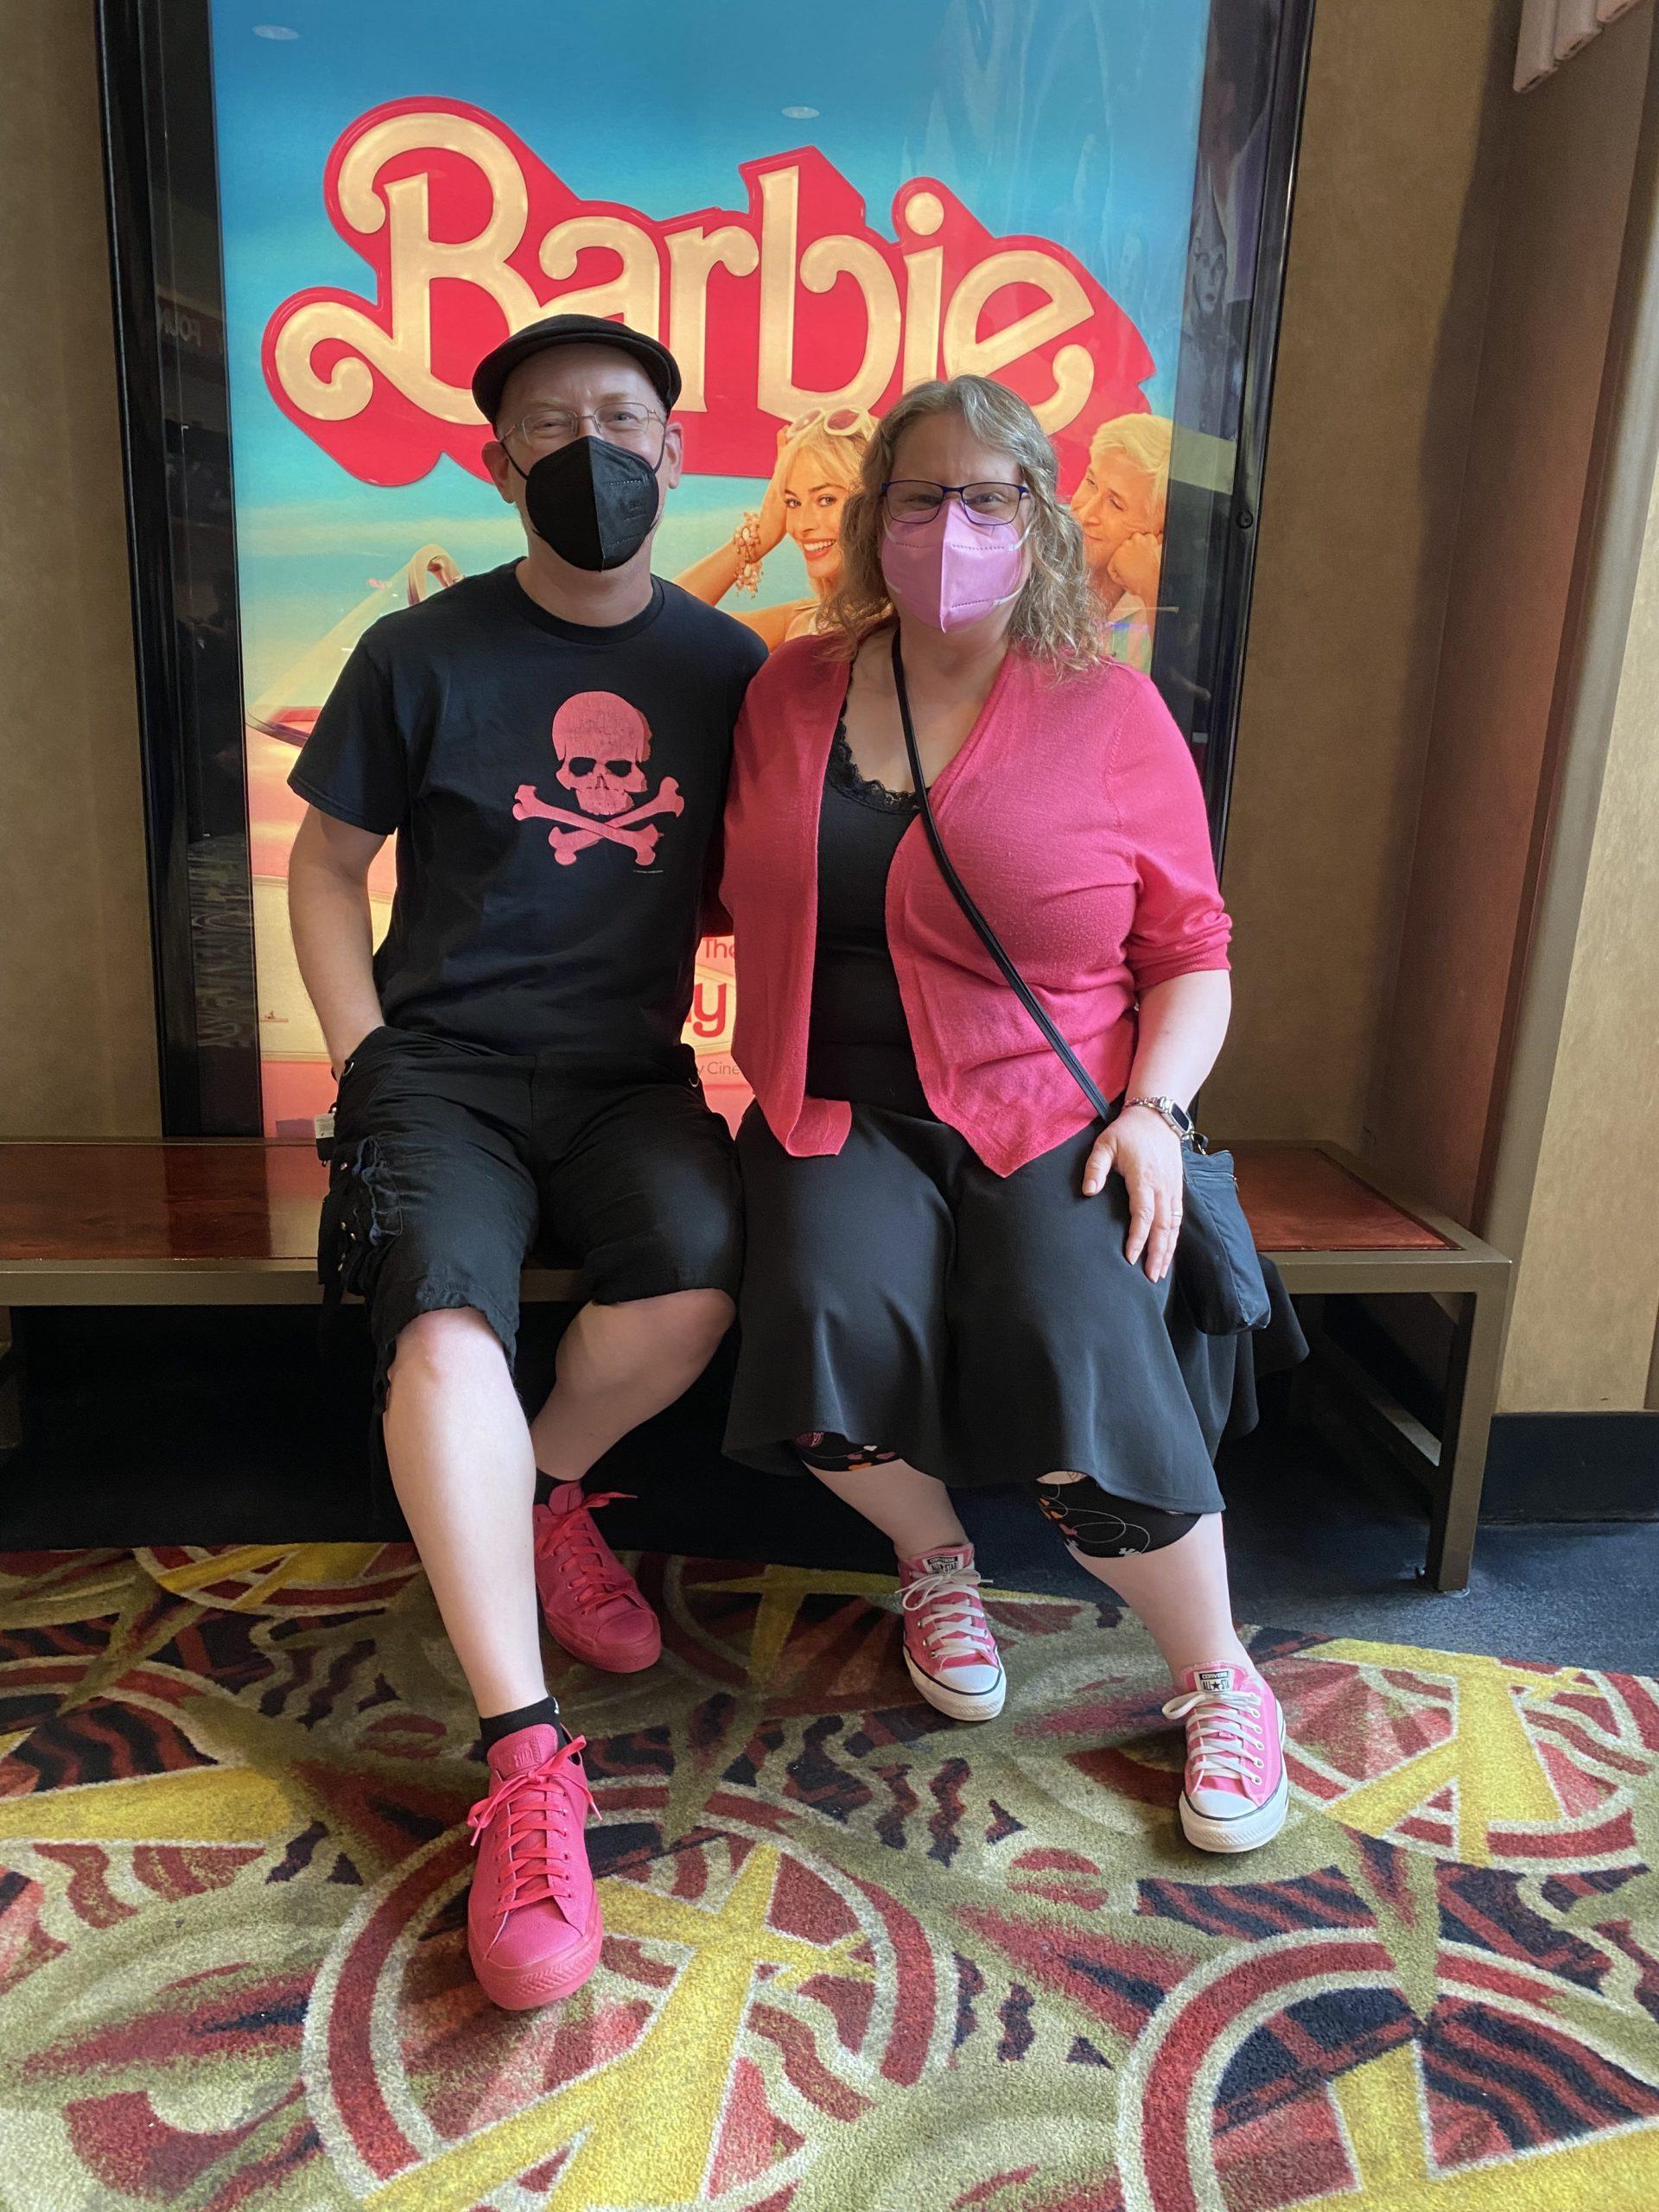 My wife and I sitting in front of a poster for the Barbie movie. I'm wearing black shorts and a black t-shirt with a pink skull and crossbones and bright pink Converse, my wife is wearing a pink sweater over a black top and skirt and light pink Converse.